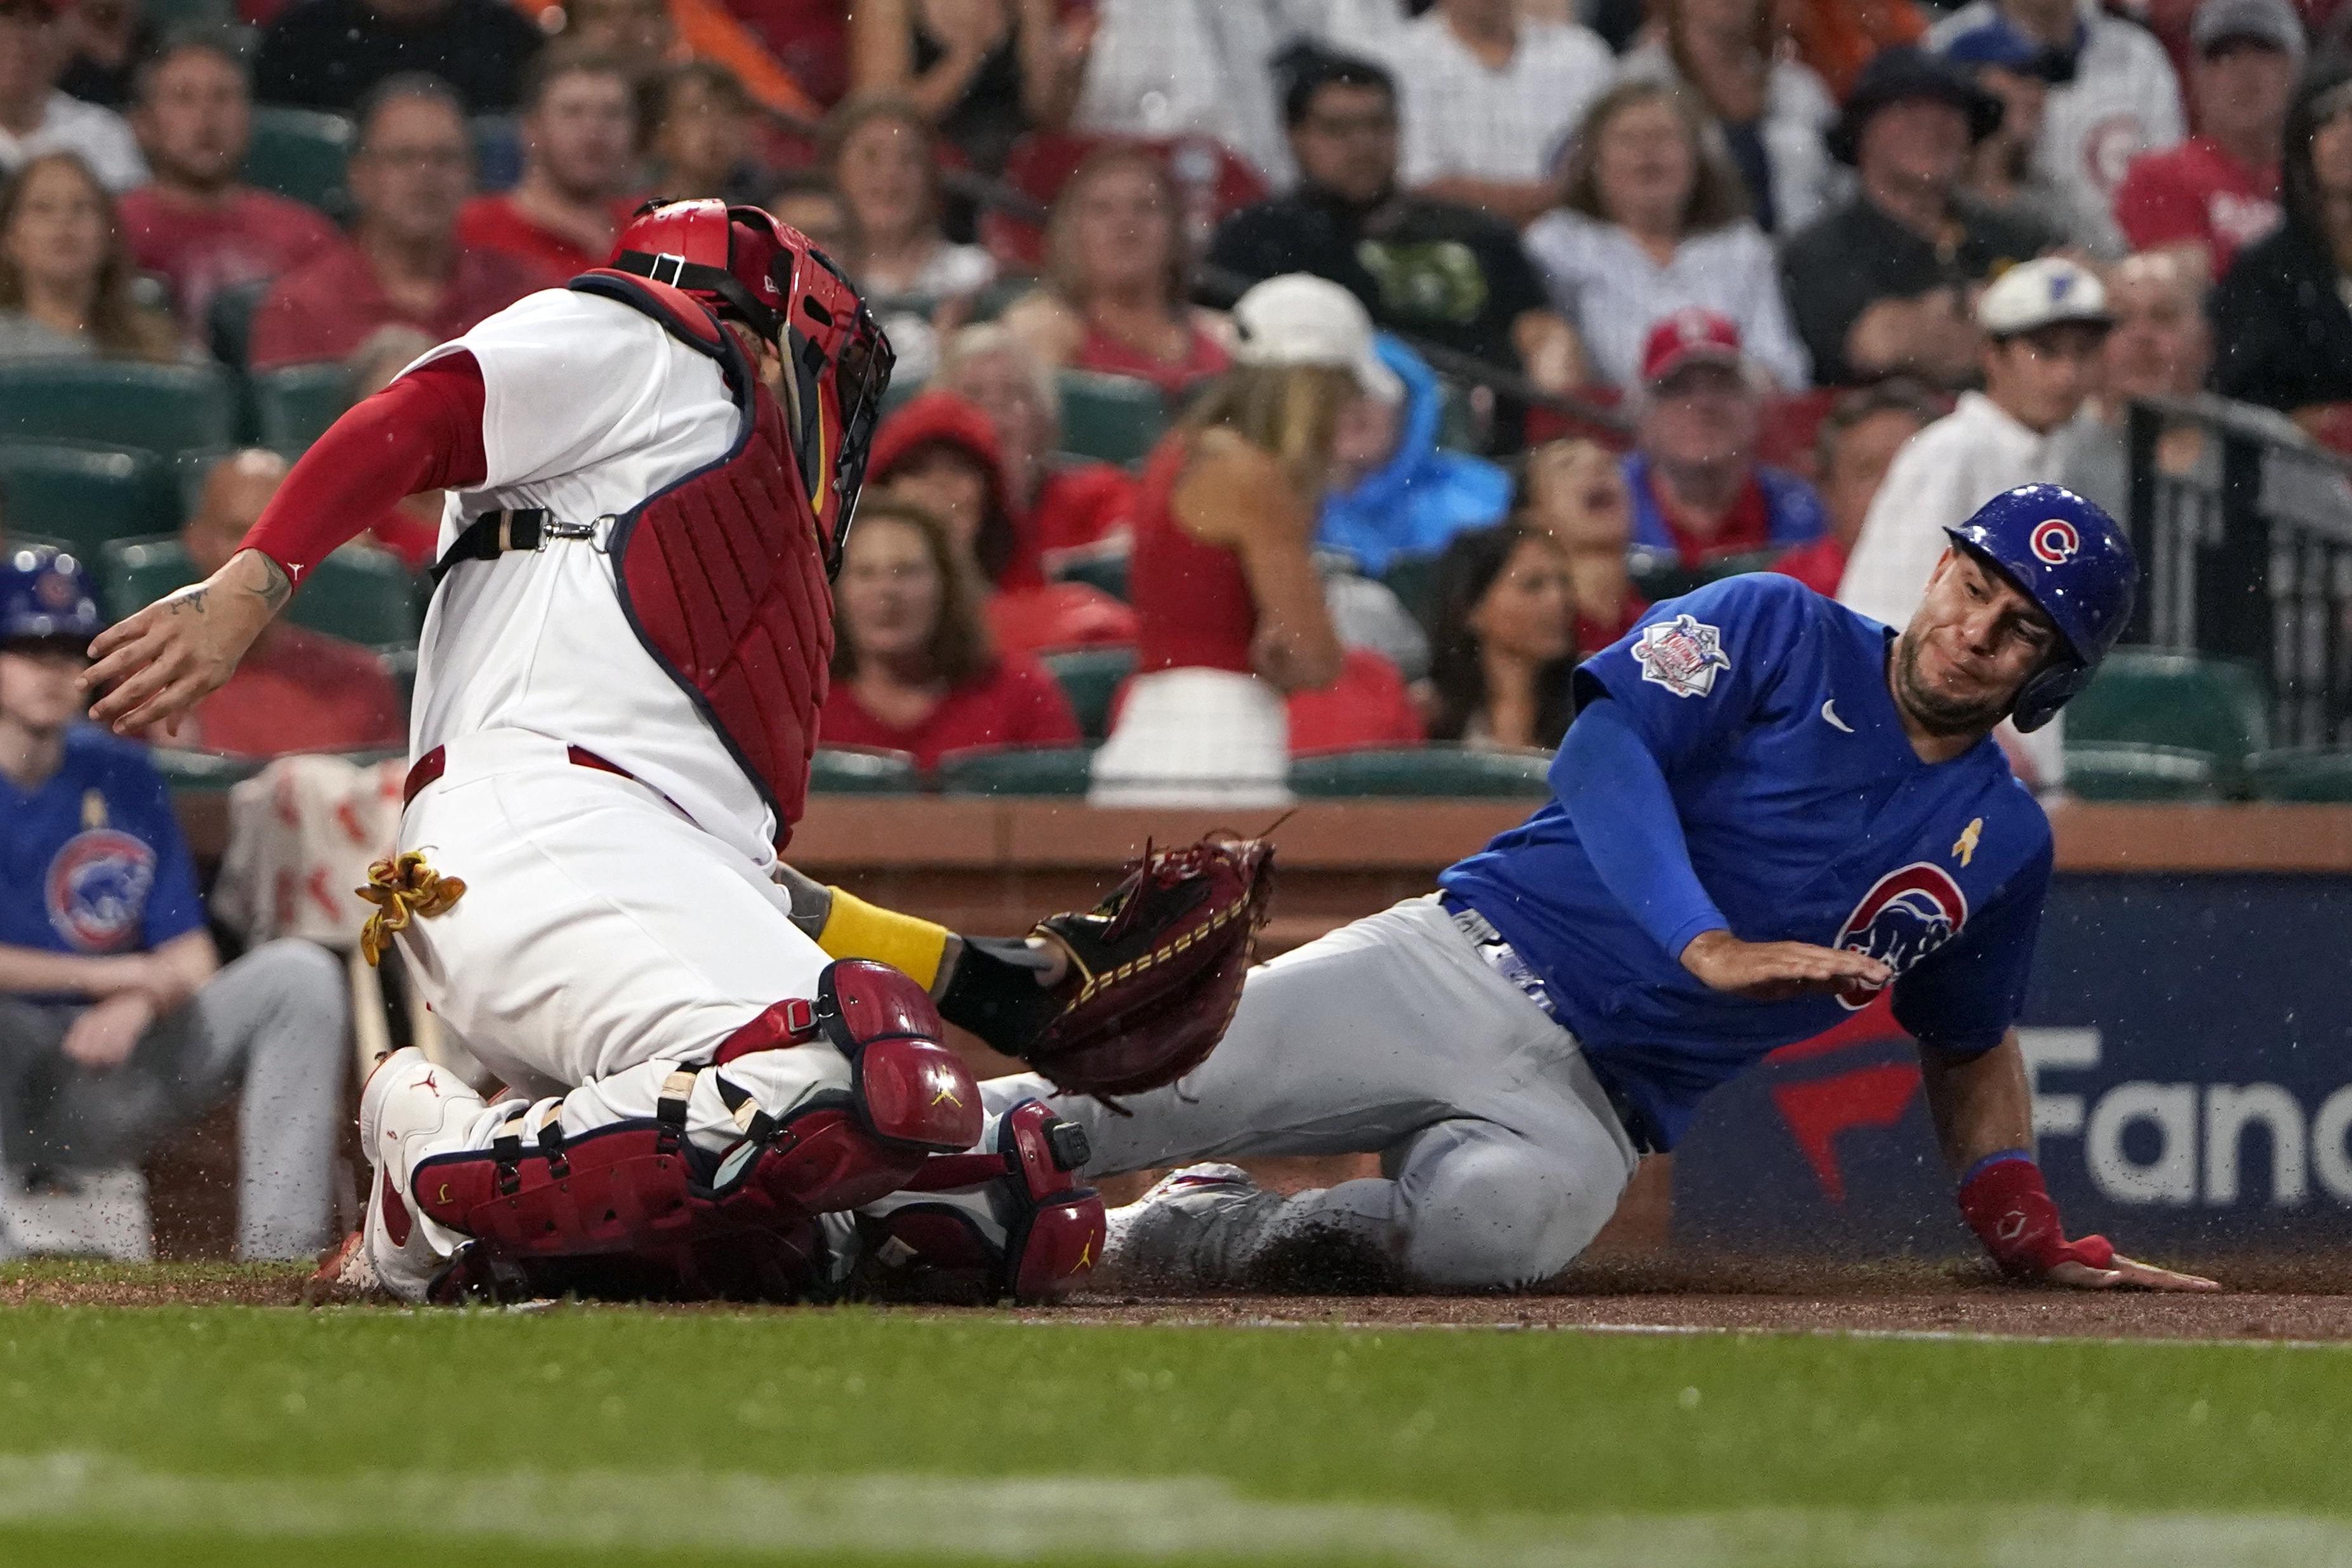 RED SOX: Win streak ends at seven after Cubs score eight in 8th